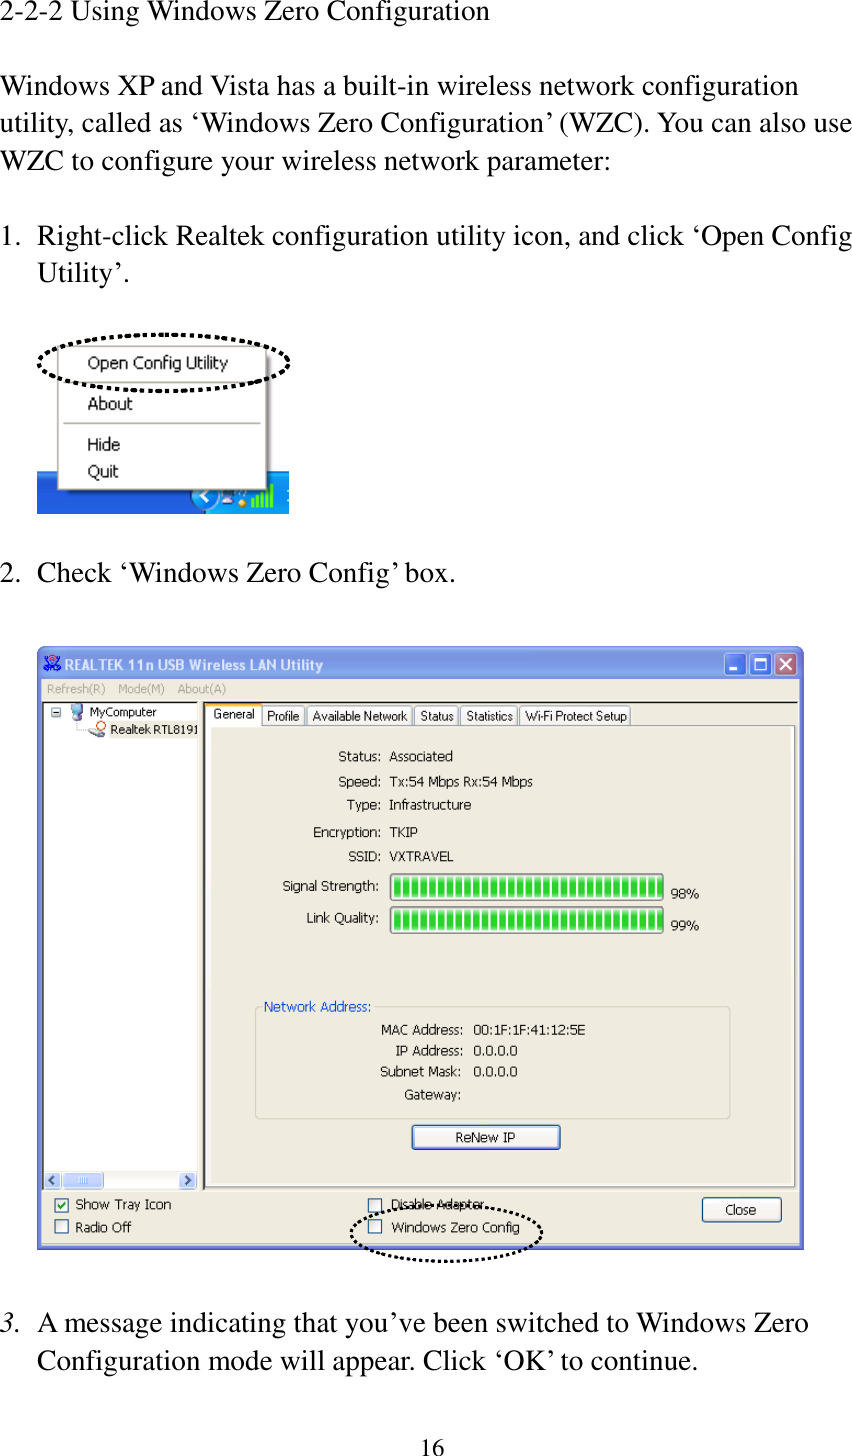 16  2-2-2 Using Windows Zero Configuration  Windows XP and Vista has a built-in wireless network configuration utility, called as ‘Windows Zero Configuration’ (WZC). You can also use WZC to configure your wireless network parameter:  1. Right-click Realtek configuration utility icon, and click ‘Open Config Utility’.    2. Check ‘Windows Zero Config’ box.    3. A message indicating that you’ve been switched to Windows Zero Configuration mode will appear. Click ‘OK’ to continue. 